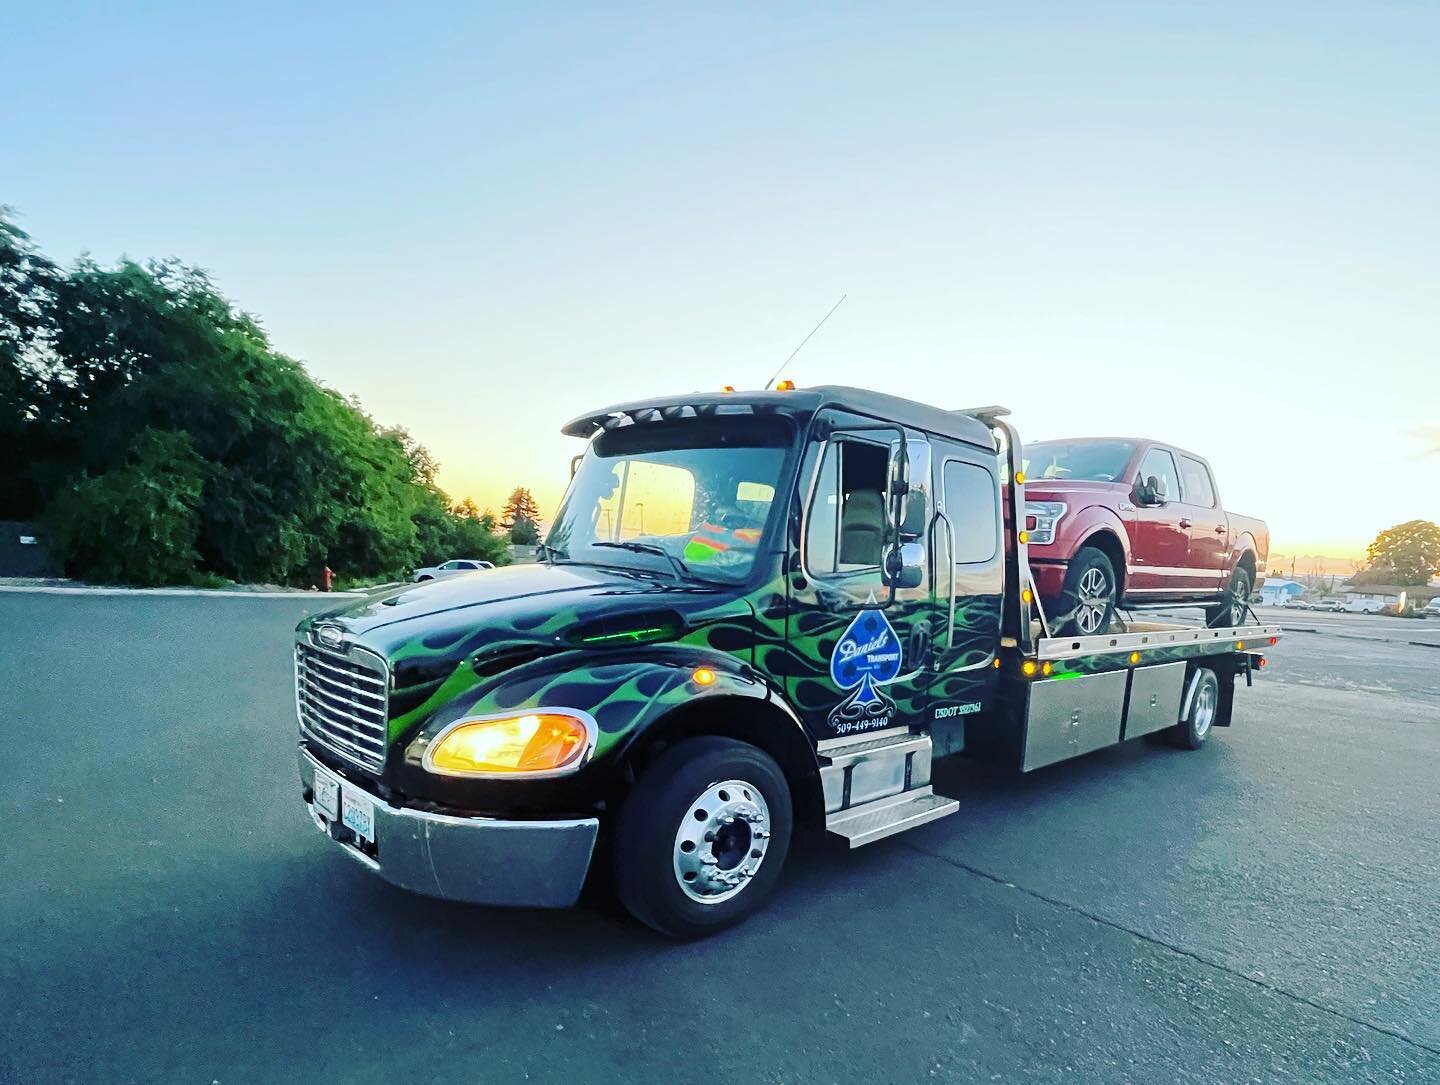 Last minute trip to Klamath Falls Oregon for a family stranded with their pickup back to Moses lake.  980 miles same day.  Was super comfy in the black truck and all 5 of us fit nice inside. Oregon heat was not playing that day.  Few other tows with 